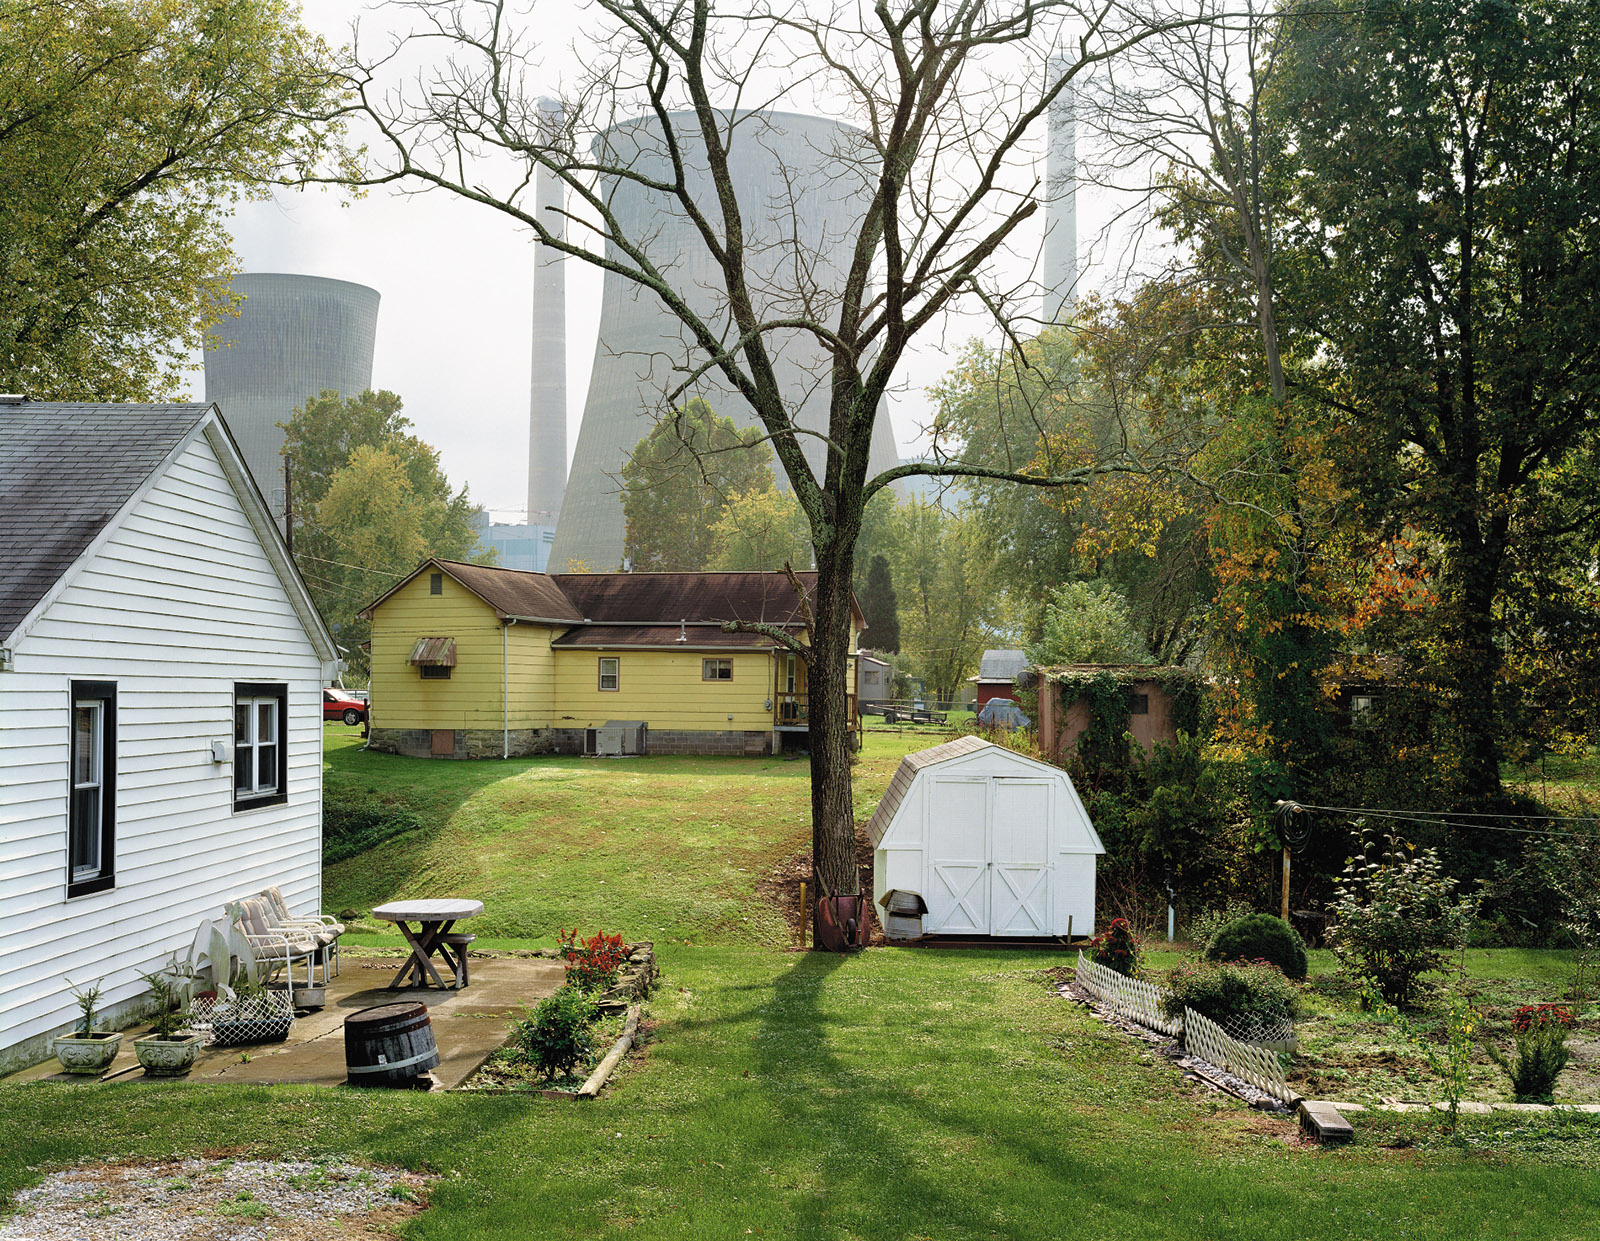 Amos Coal Power Plant, Raymond City, West Virginia, 2004; photograph by Mitch Epstein from his ‘American Power’ series